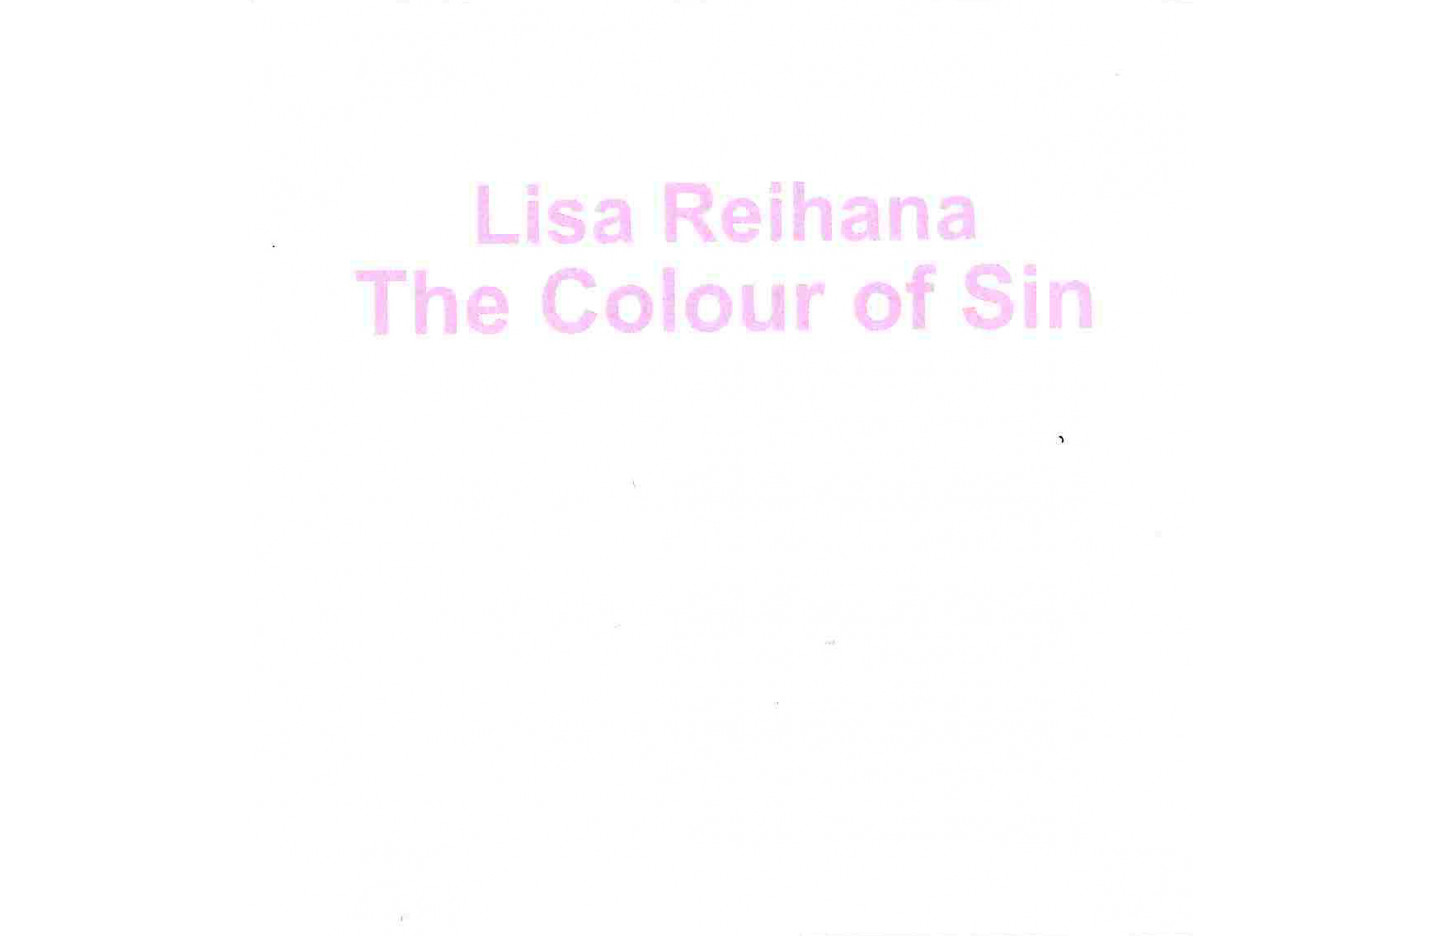 The Colour of Sin, Ramp Gallery (2004)